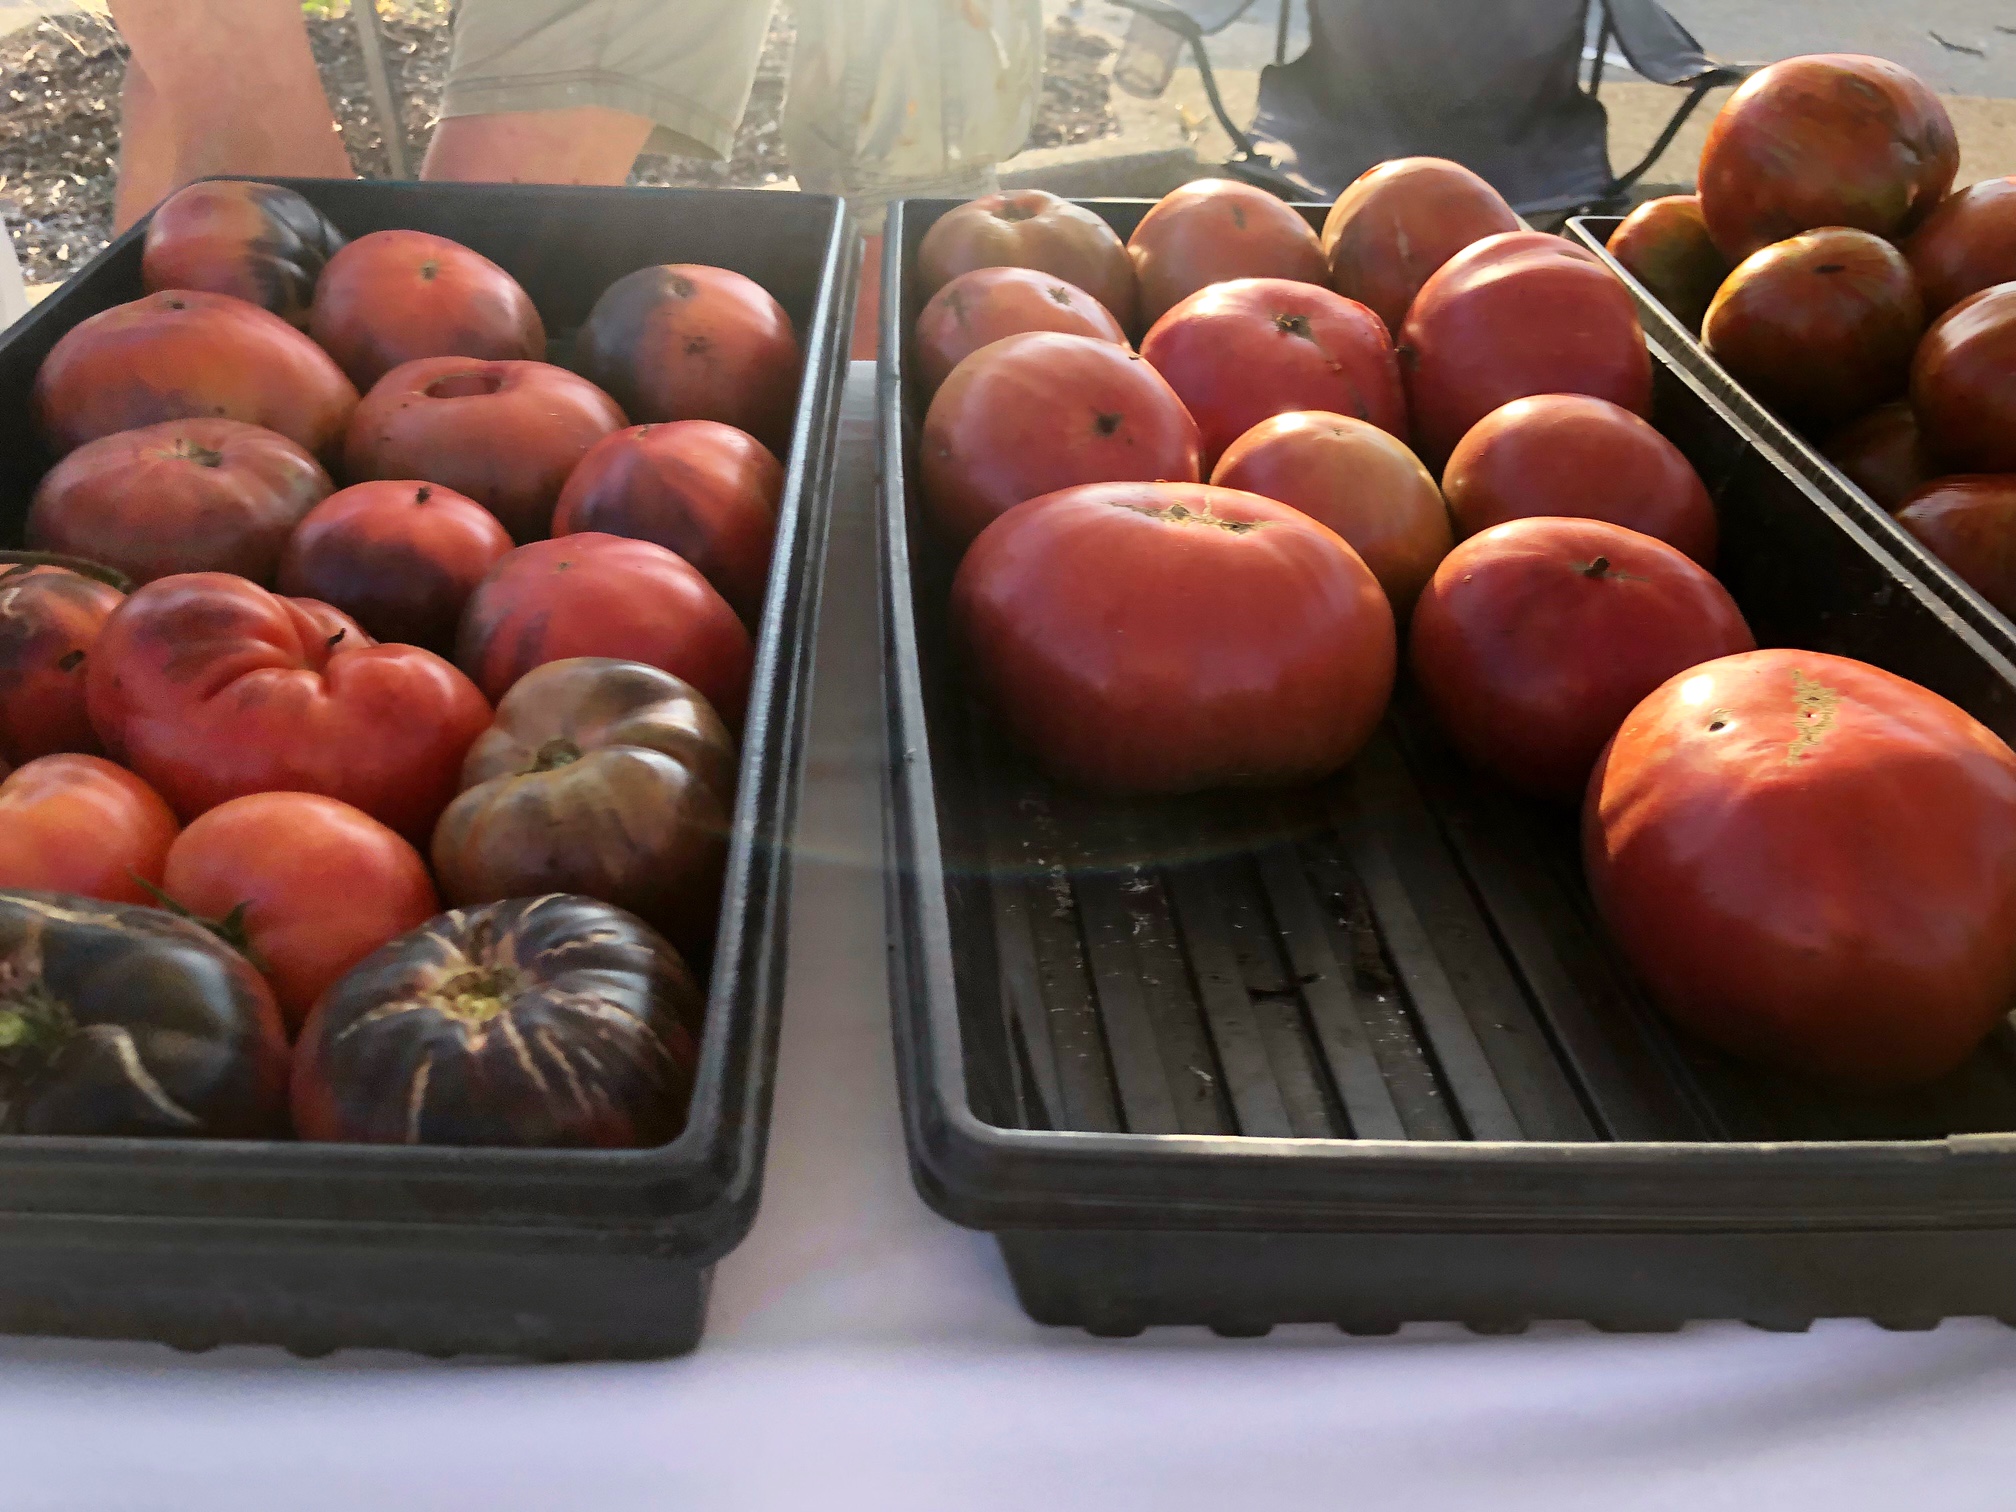 On a white tablecloth, two large, black trays are filled with heirloom tomatoes for sale in the morning light of the Urbana Market in the Square. Photo by Alyssa Buckley.